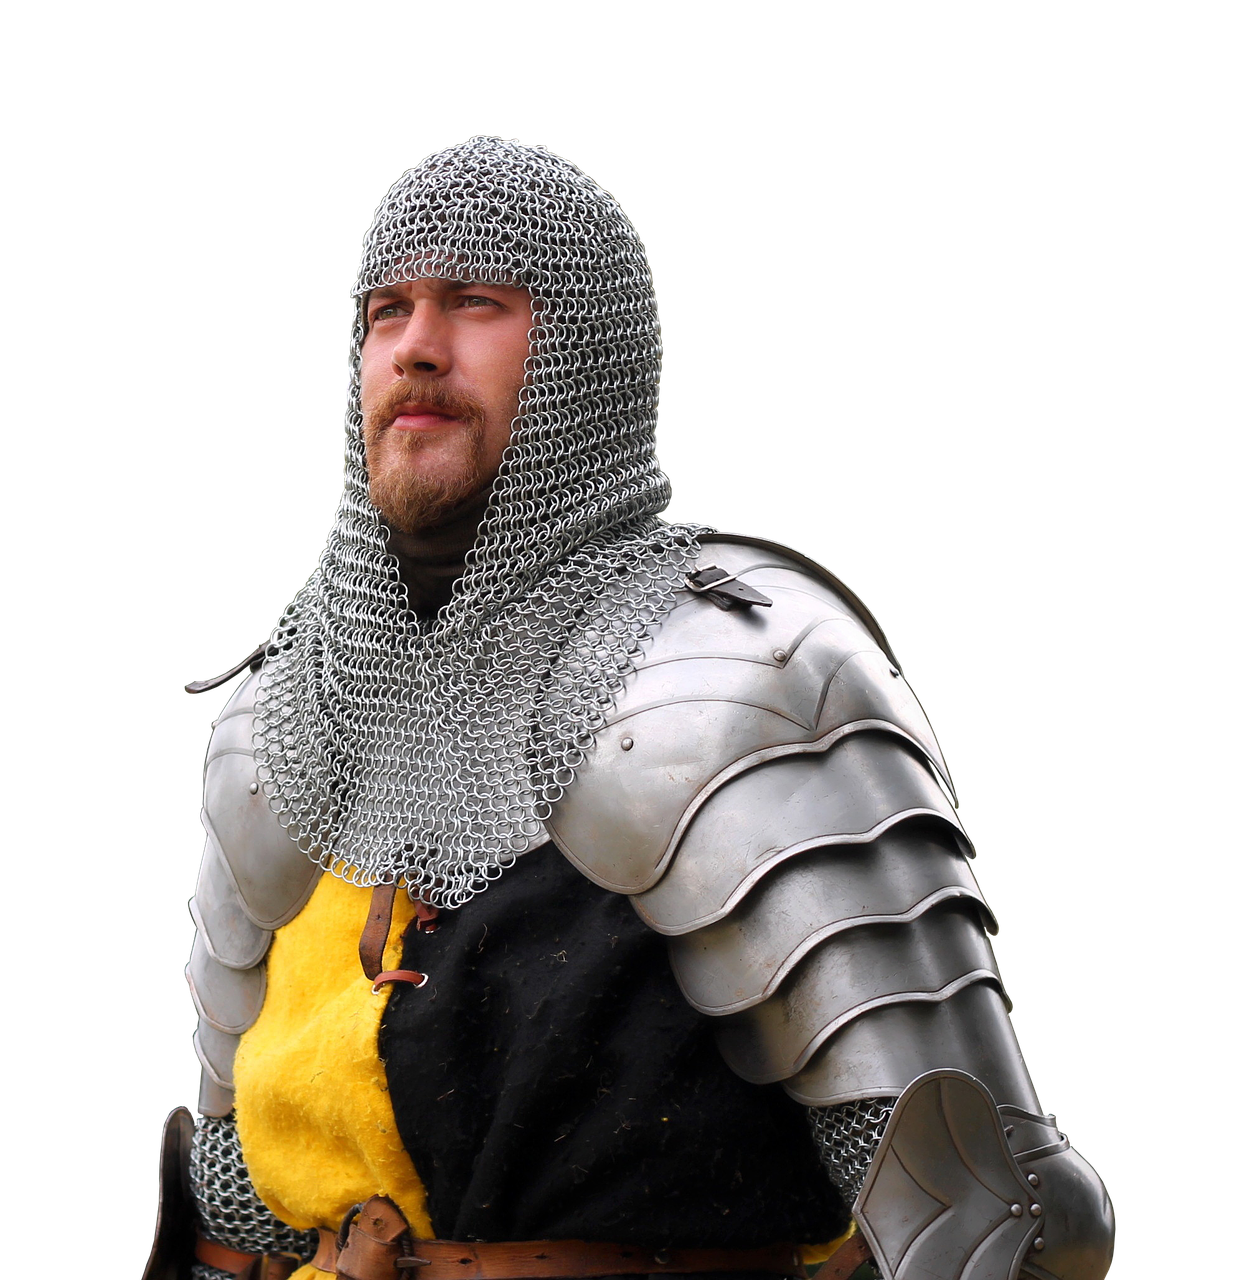 knight fencing armor free photo